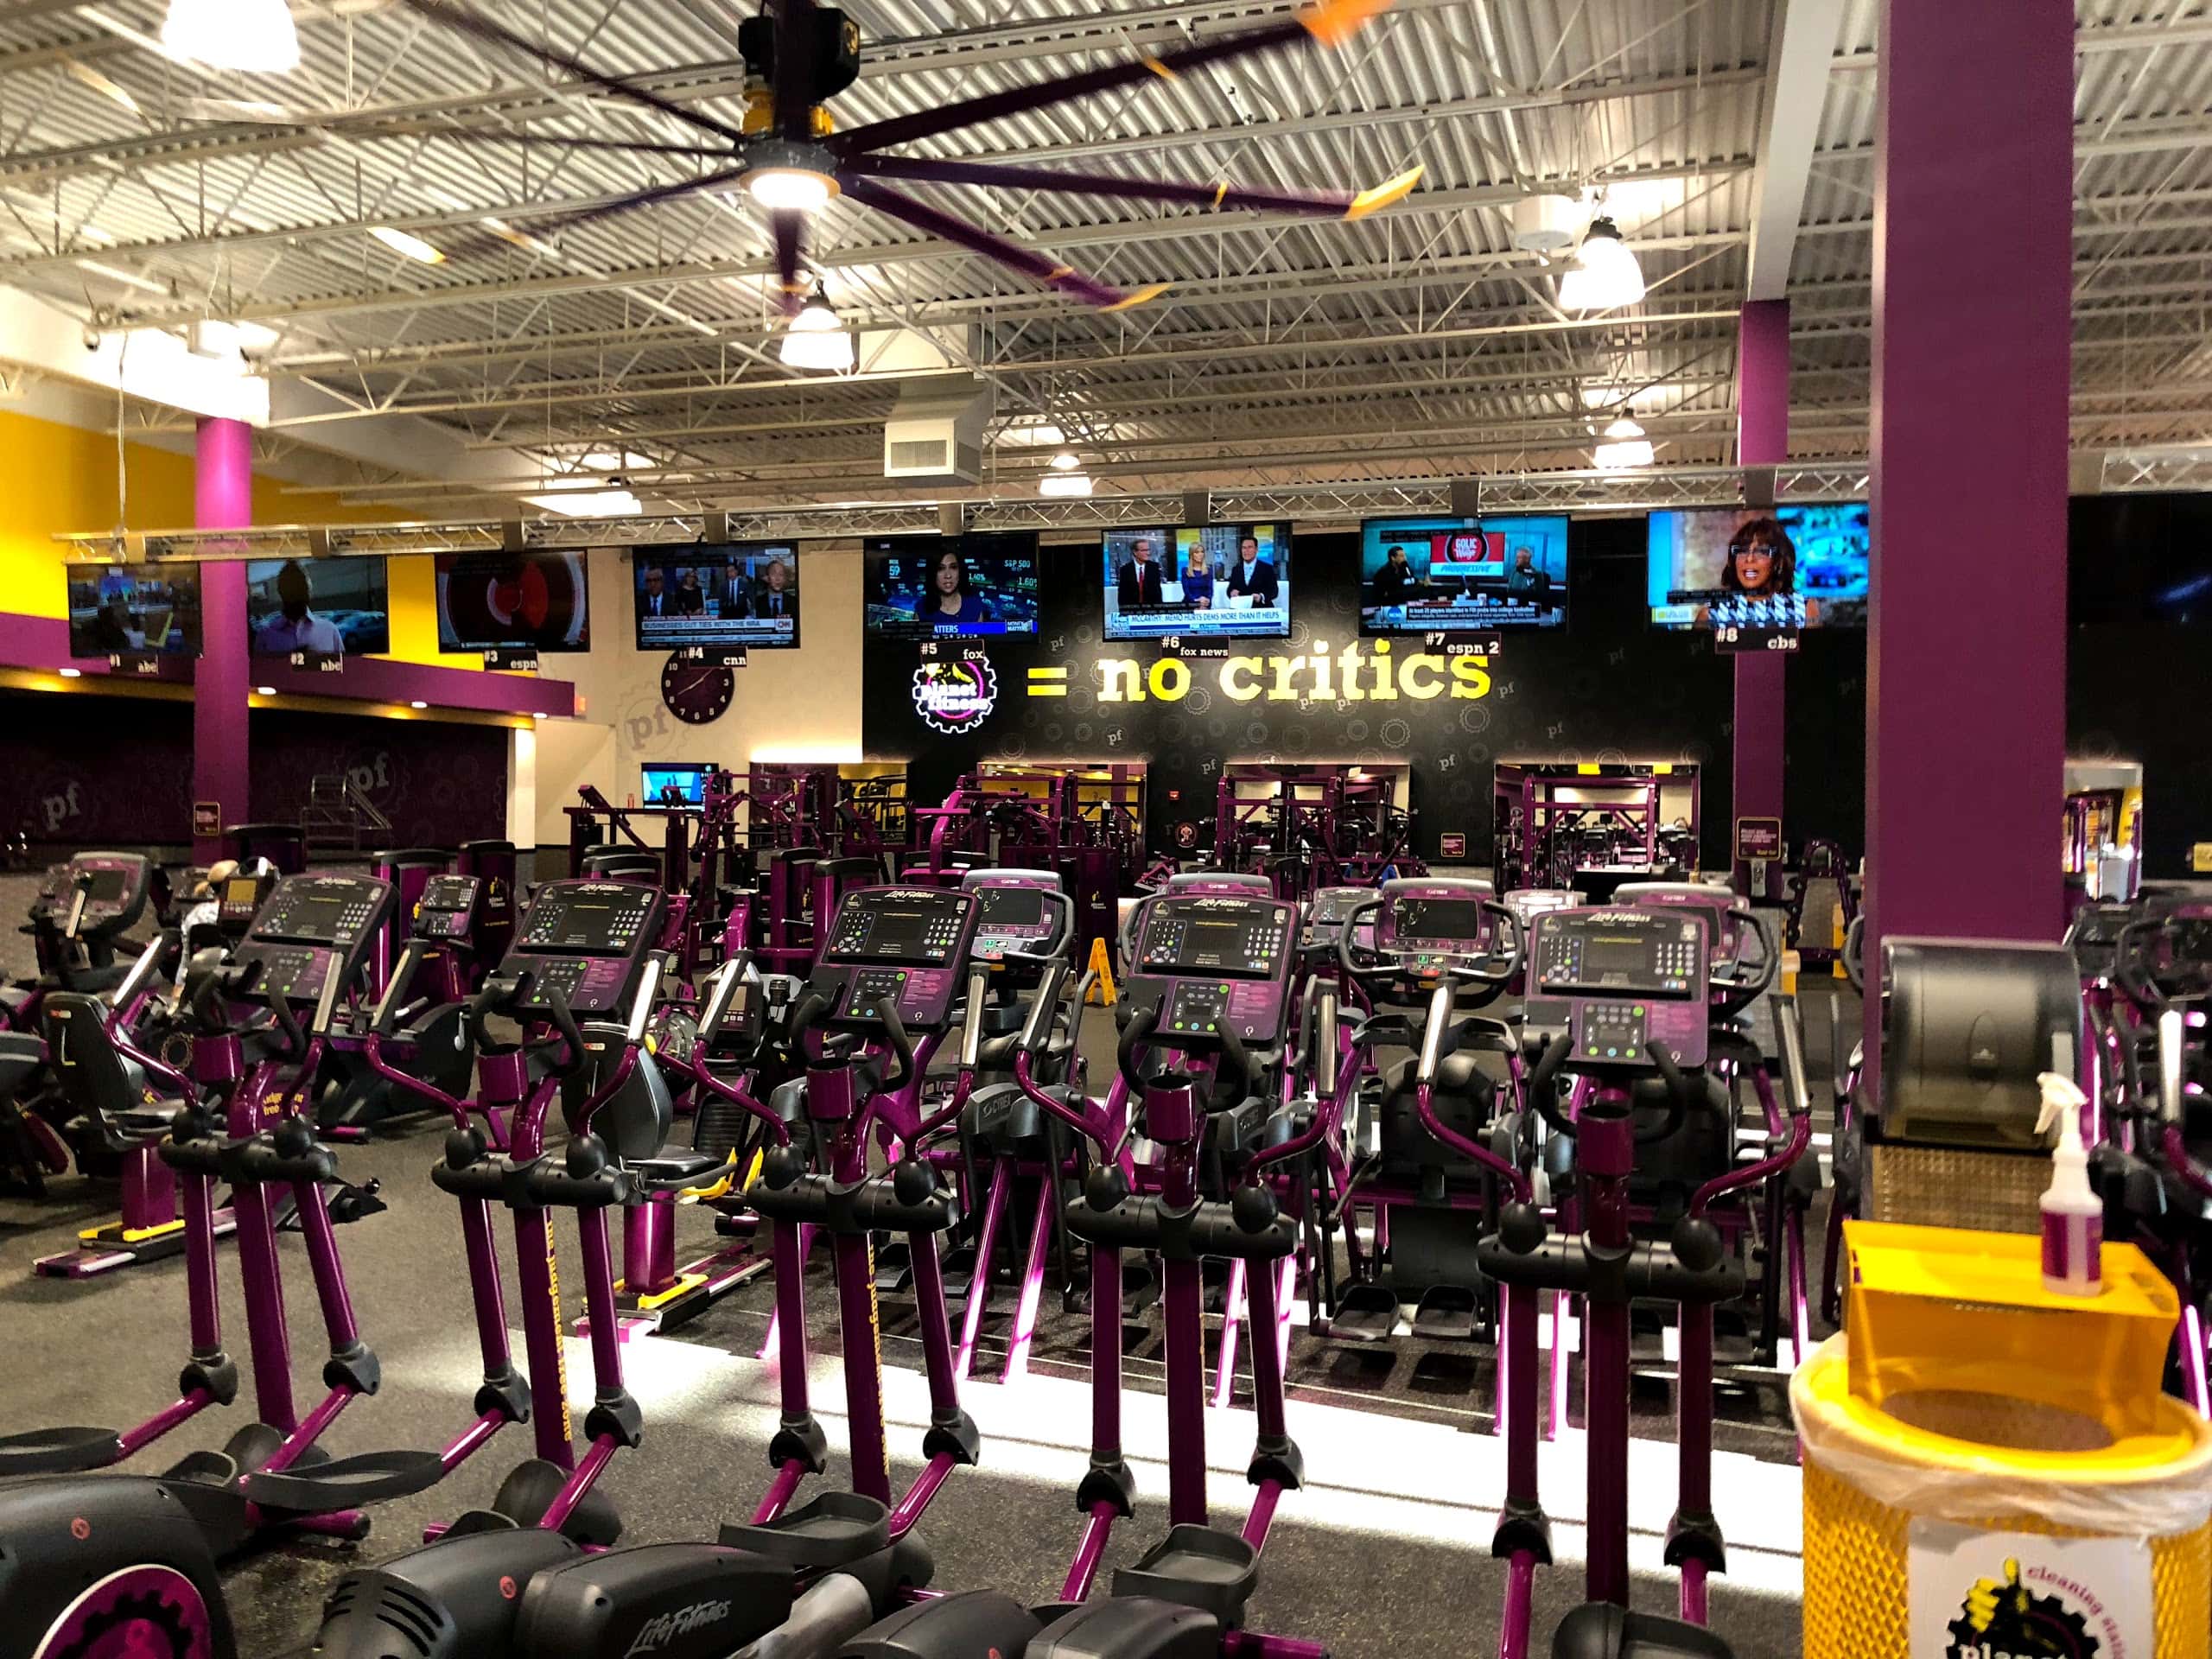 Planet Fitness - Fishers (IN 46038), US, bodyweight workout